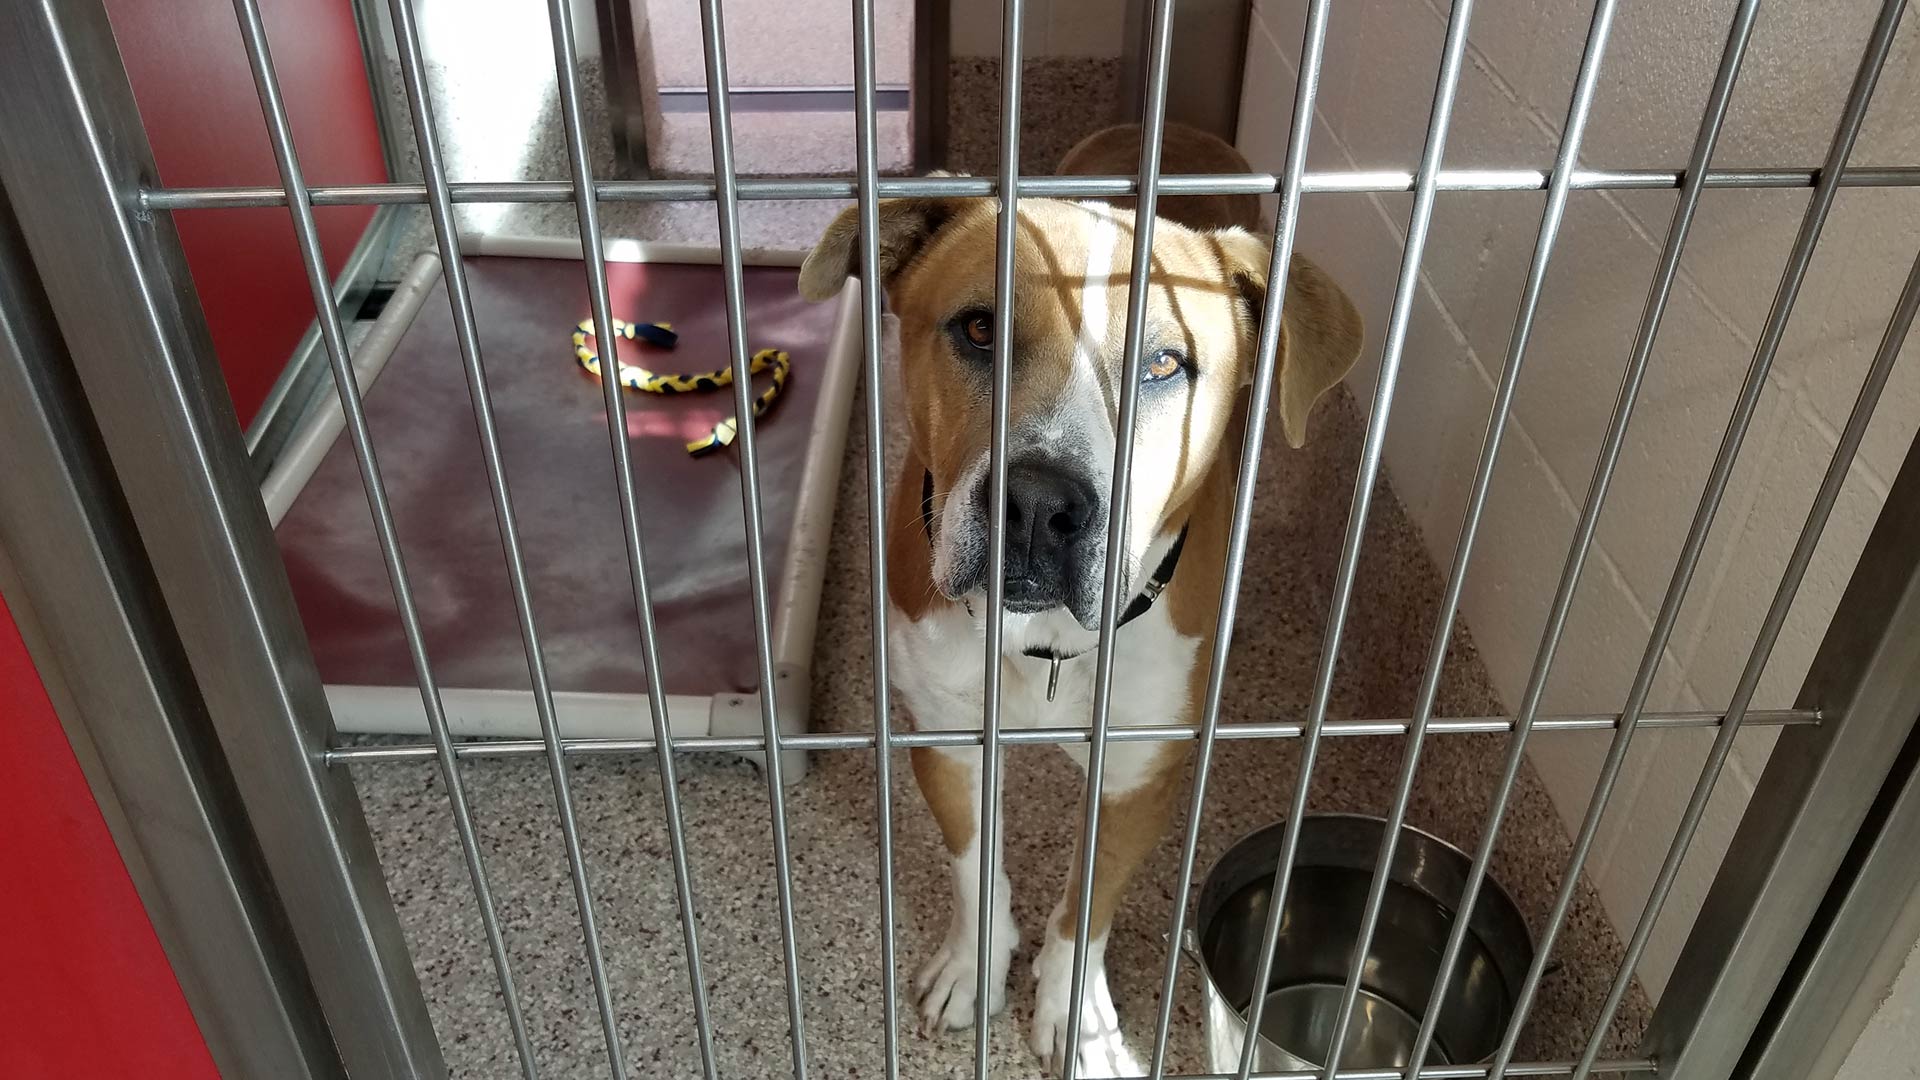 Pima Animal Care Center is overcrowded, asking community to help with  strays - AZPM